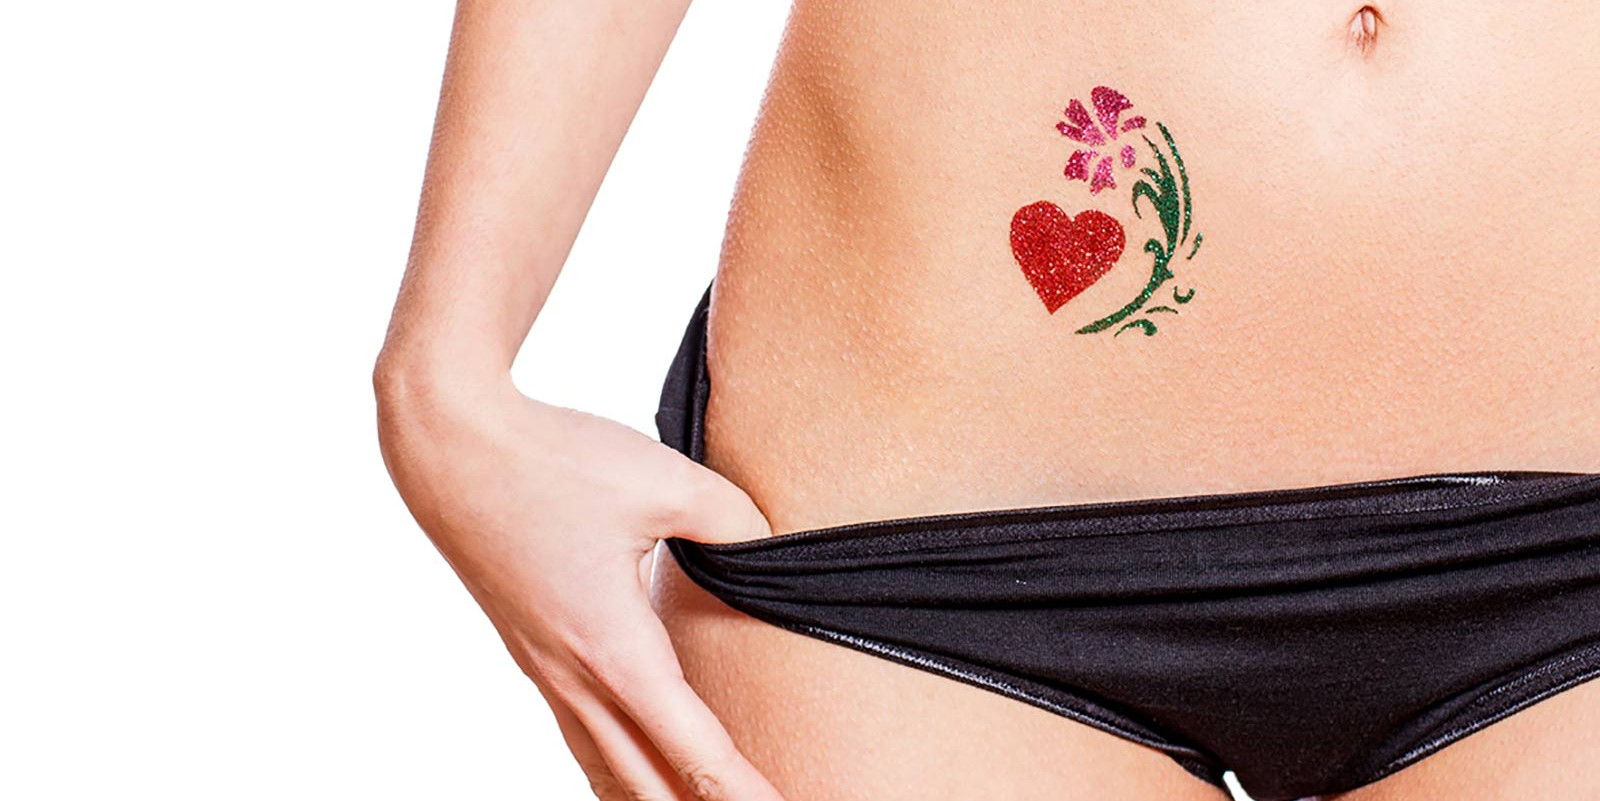 Shot of Female Lower Torso With Heart Tattoo on Belly